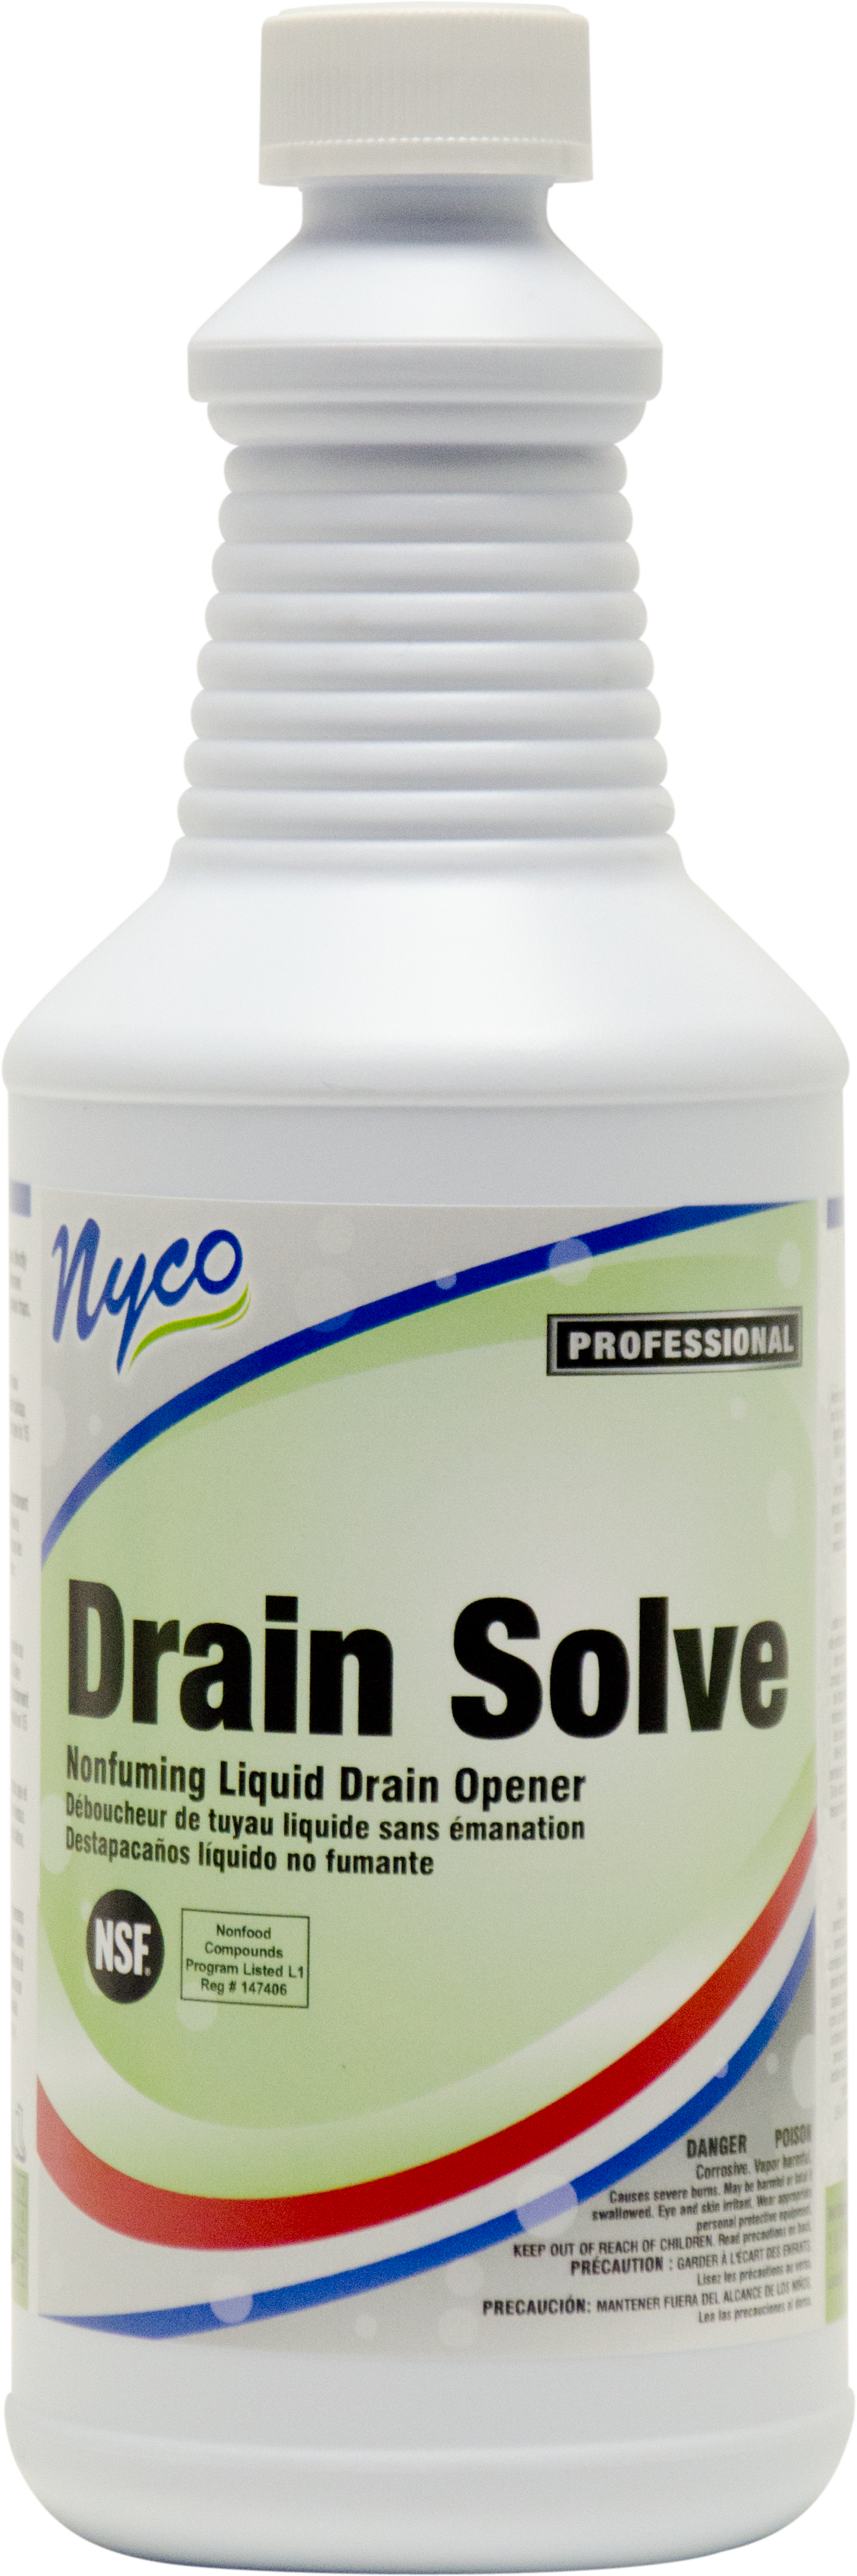 https://www.nycoproducts.com/wp-content/uploads/2016/07/NL013-Q12_Drain-Solve-1.png